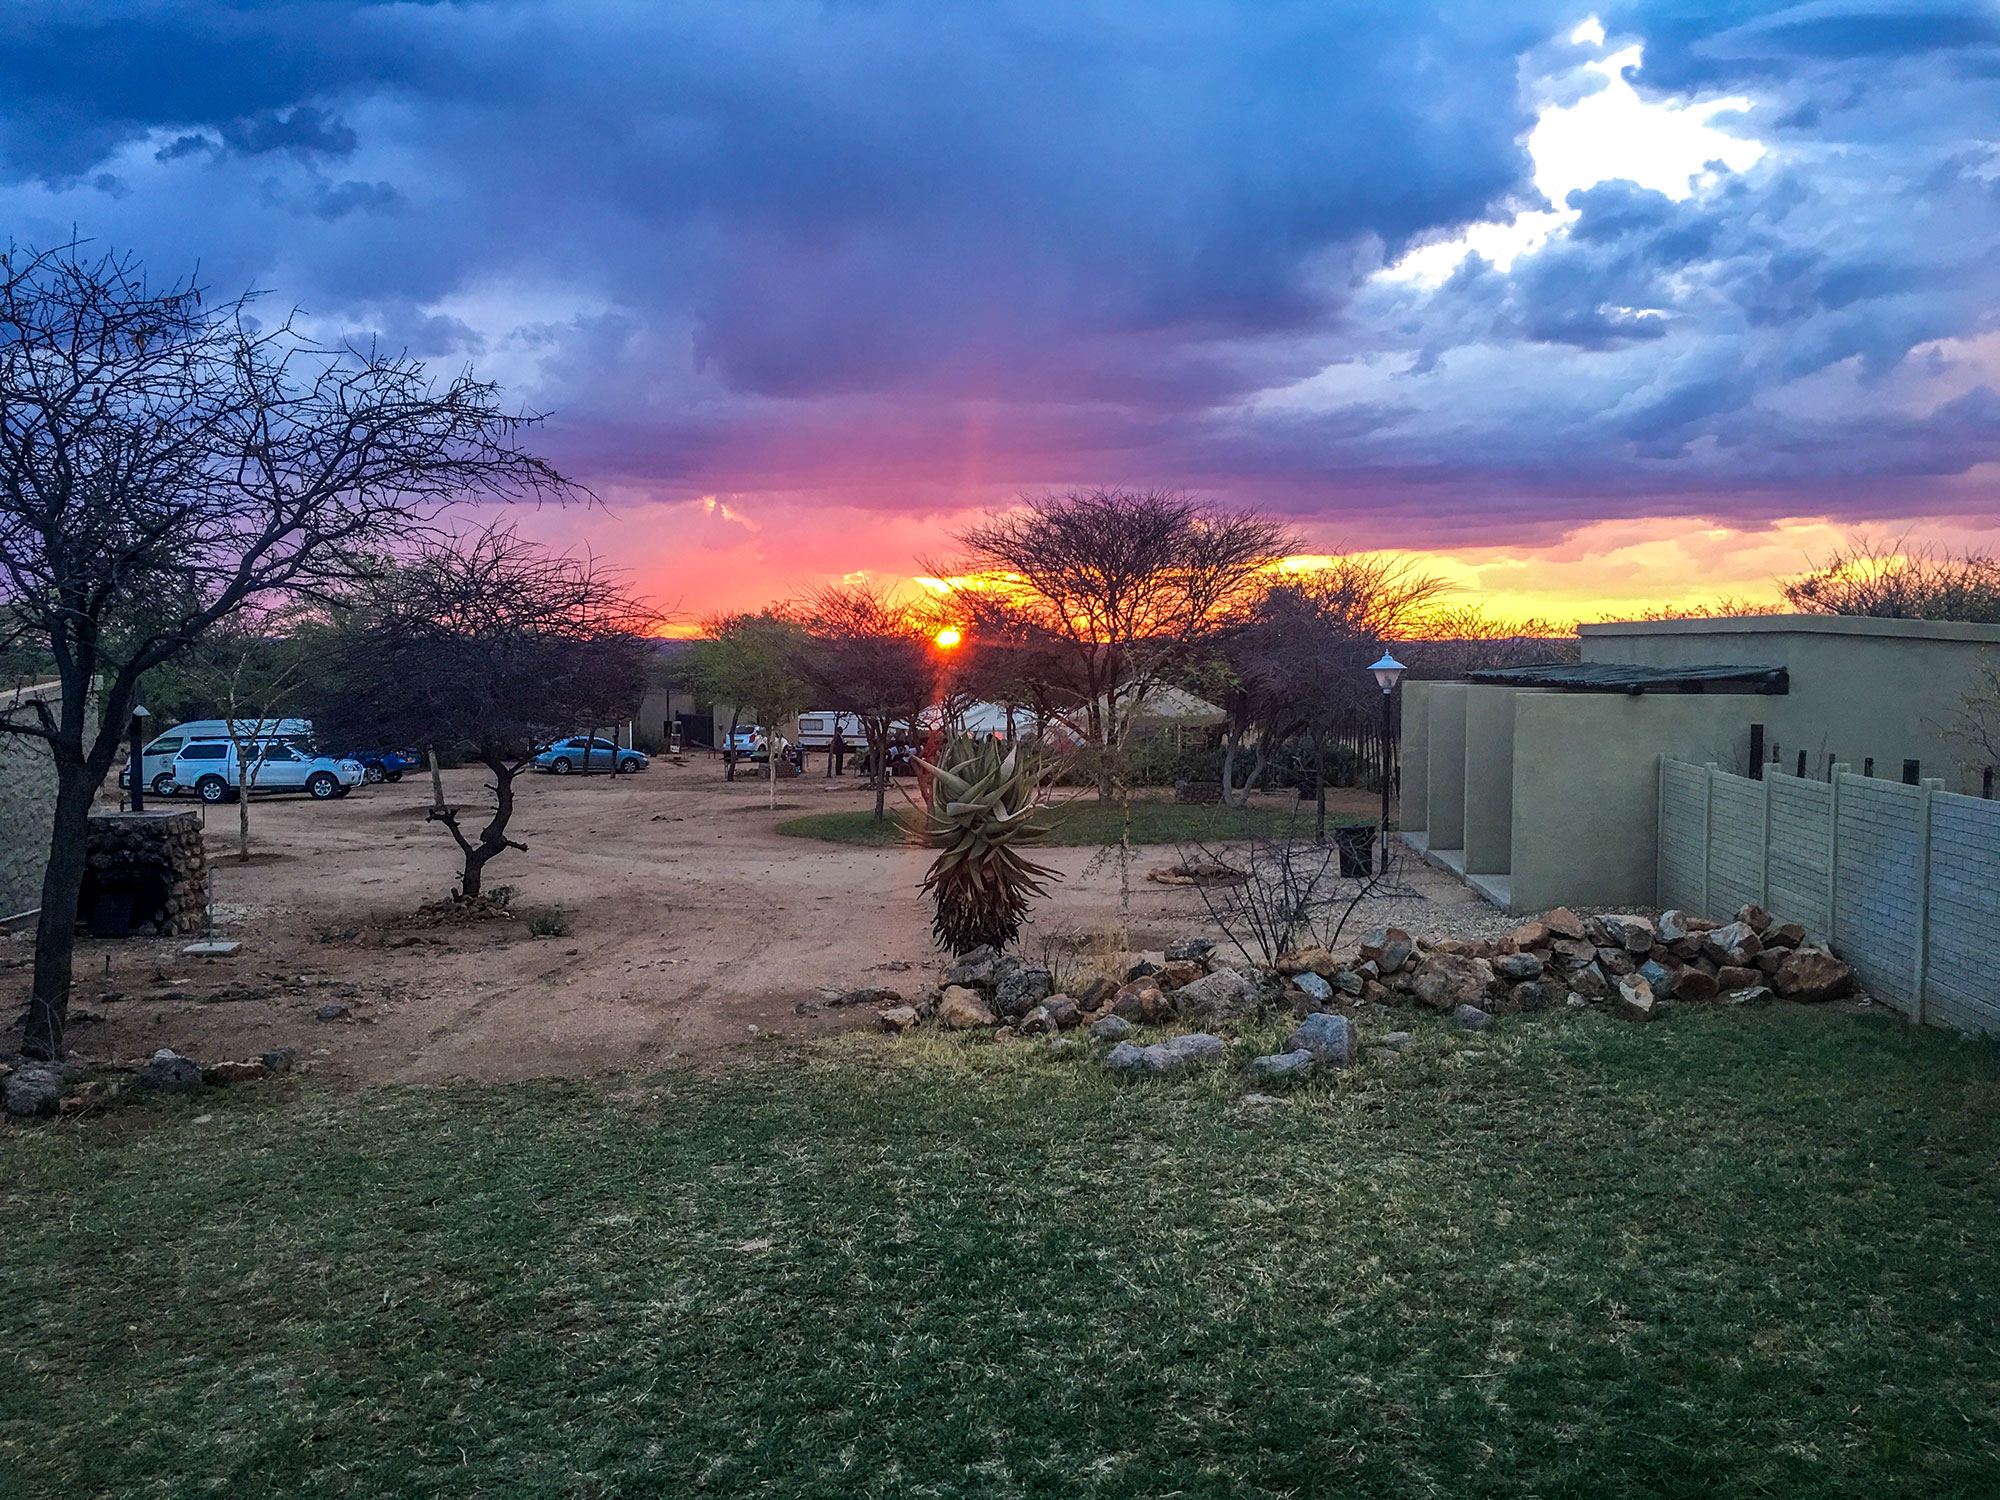 Sunset over Ombo Rest Camp in Namibia, Africa